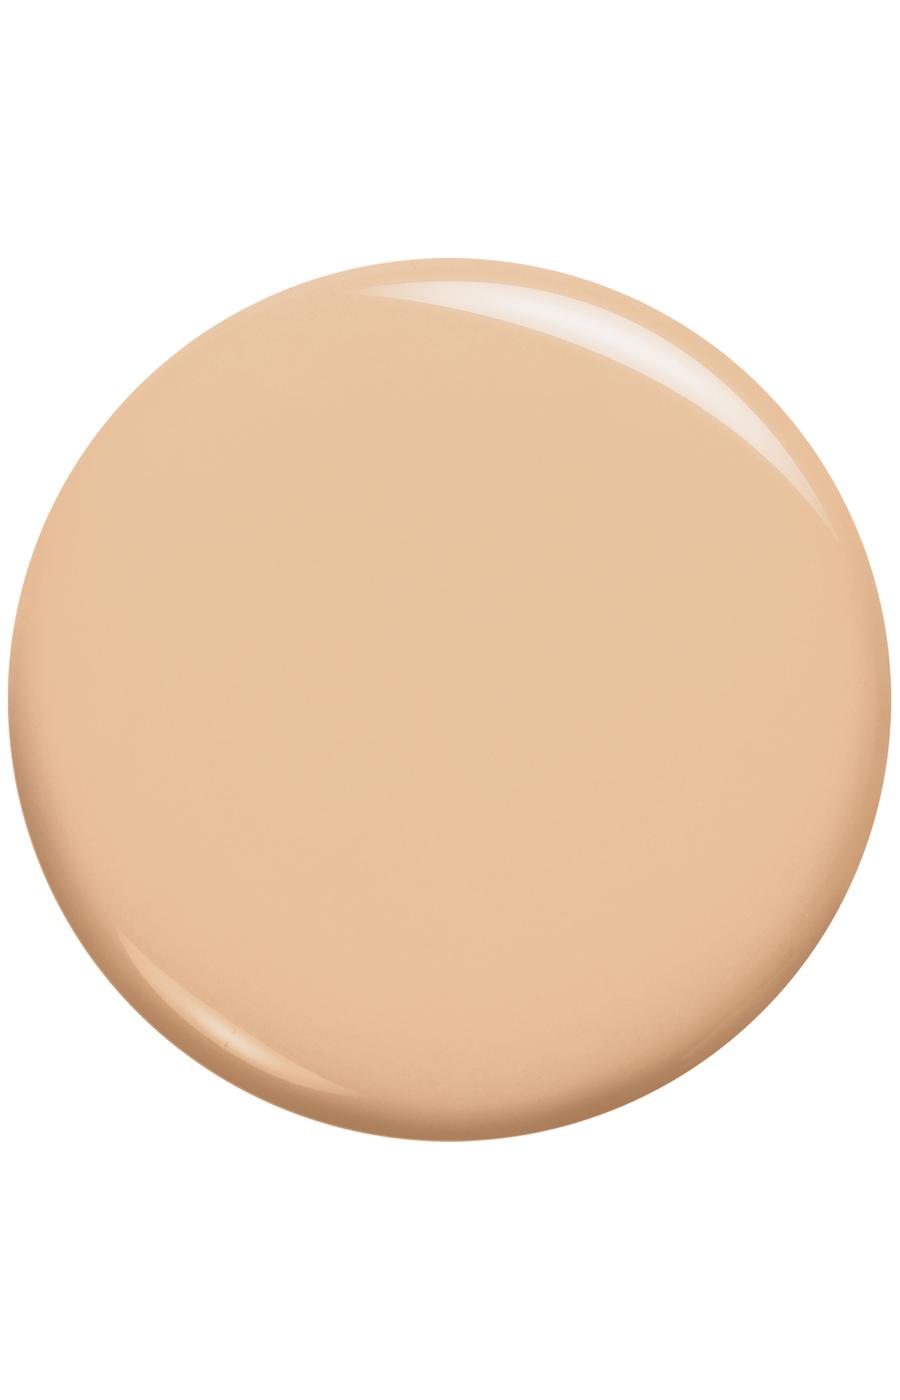 L'Oréal Paris Infallible Up to 24 Hour Fresh Wear Foundation - Lightweight Ivory Buff; image 4 of 7